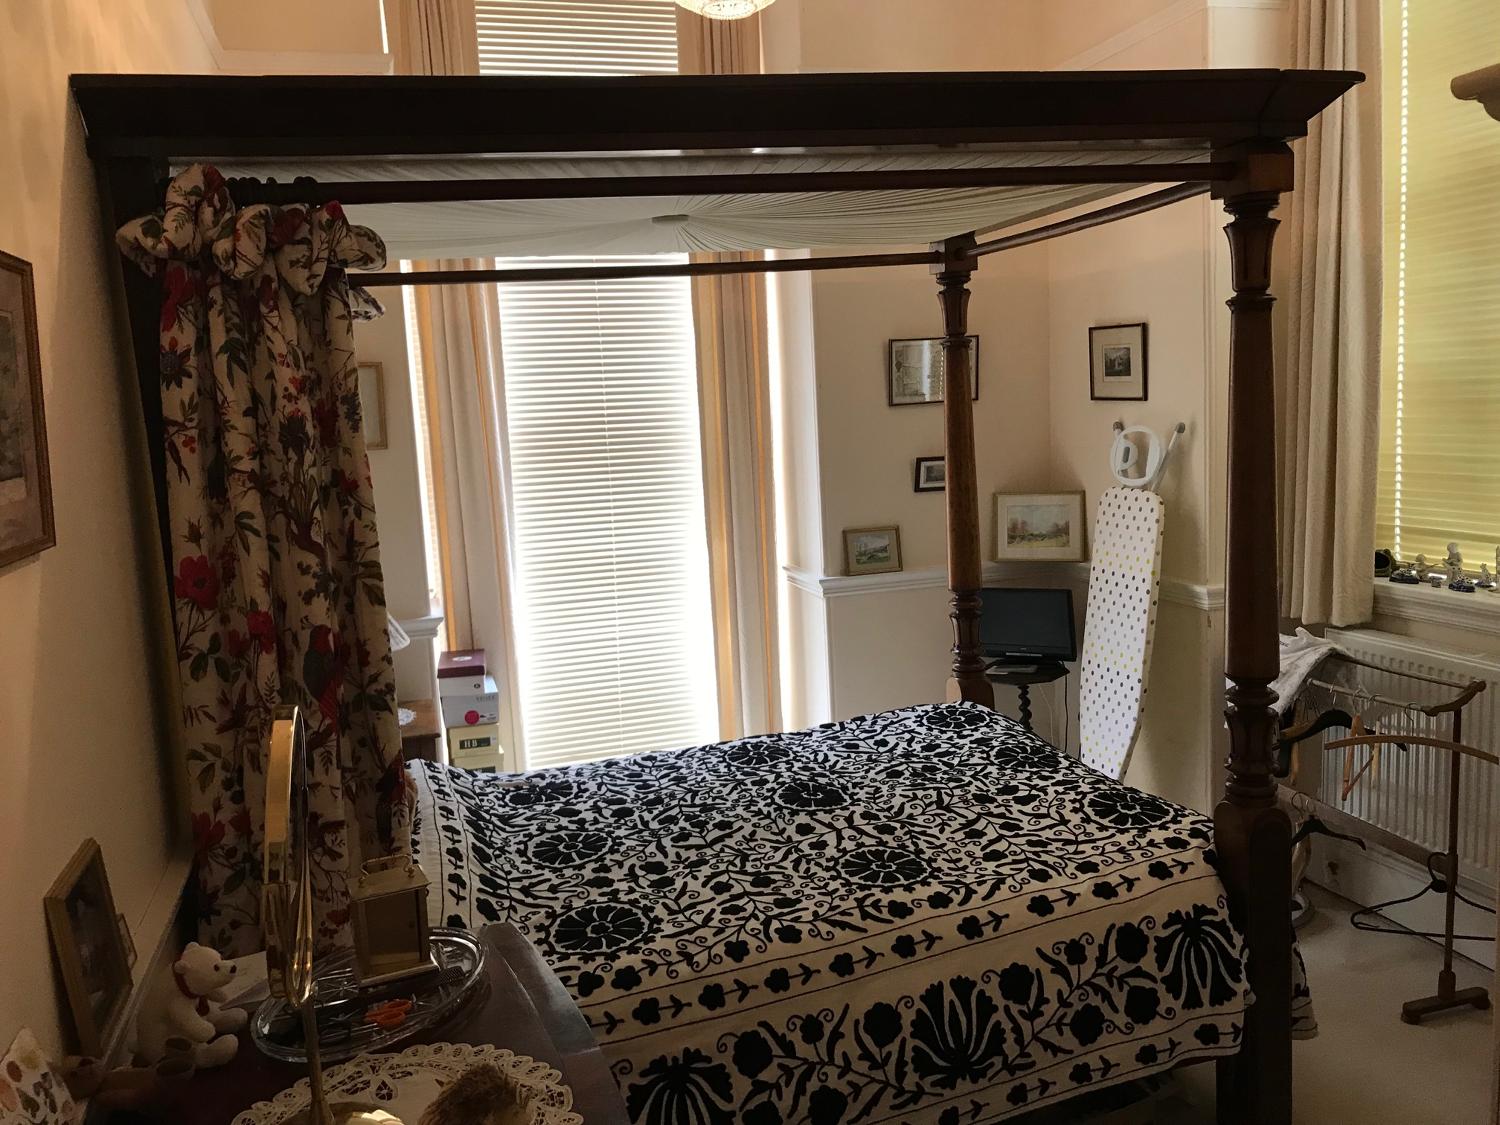 A 19th century mahogany four poster bed